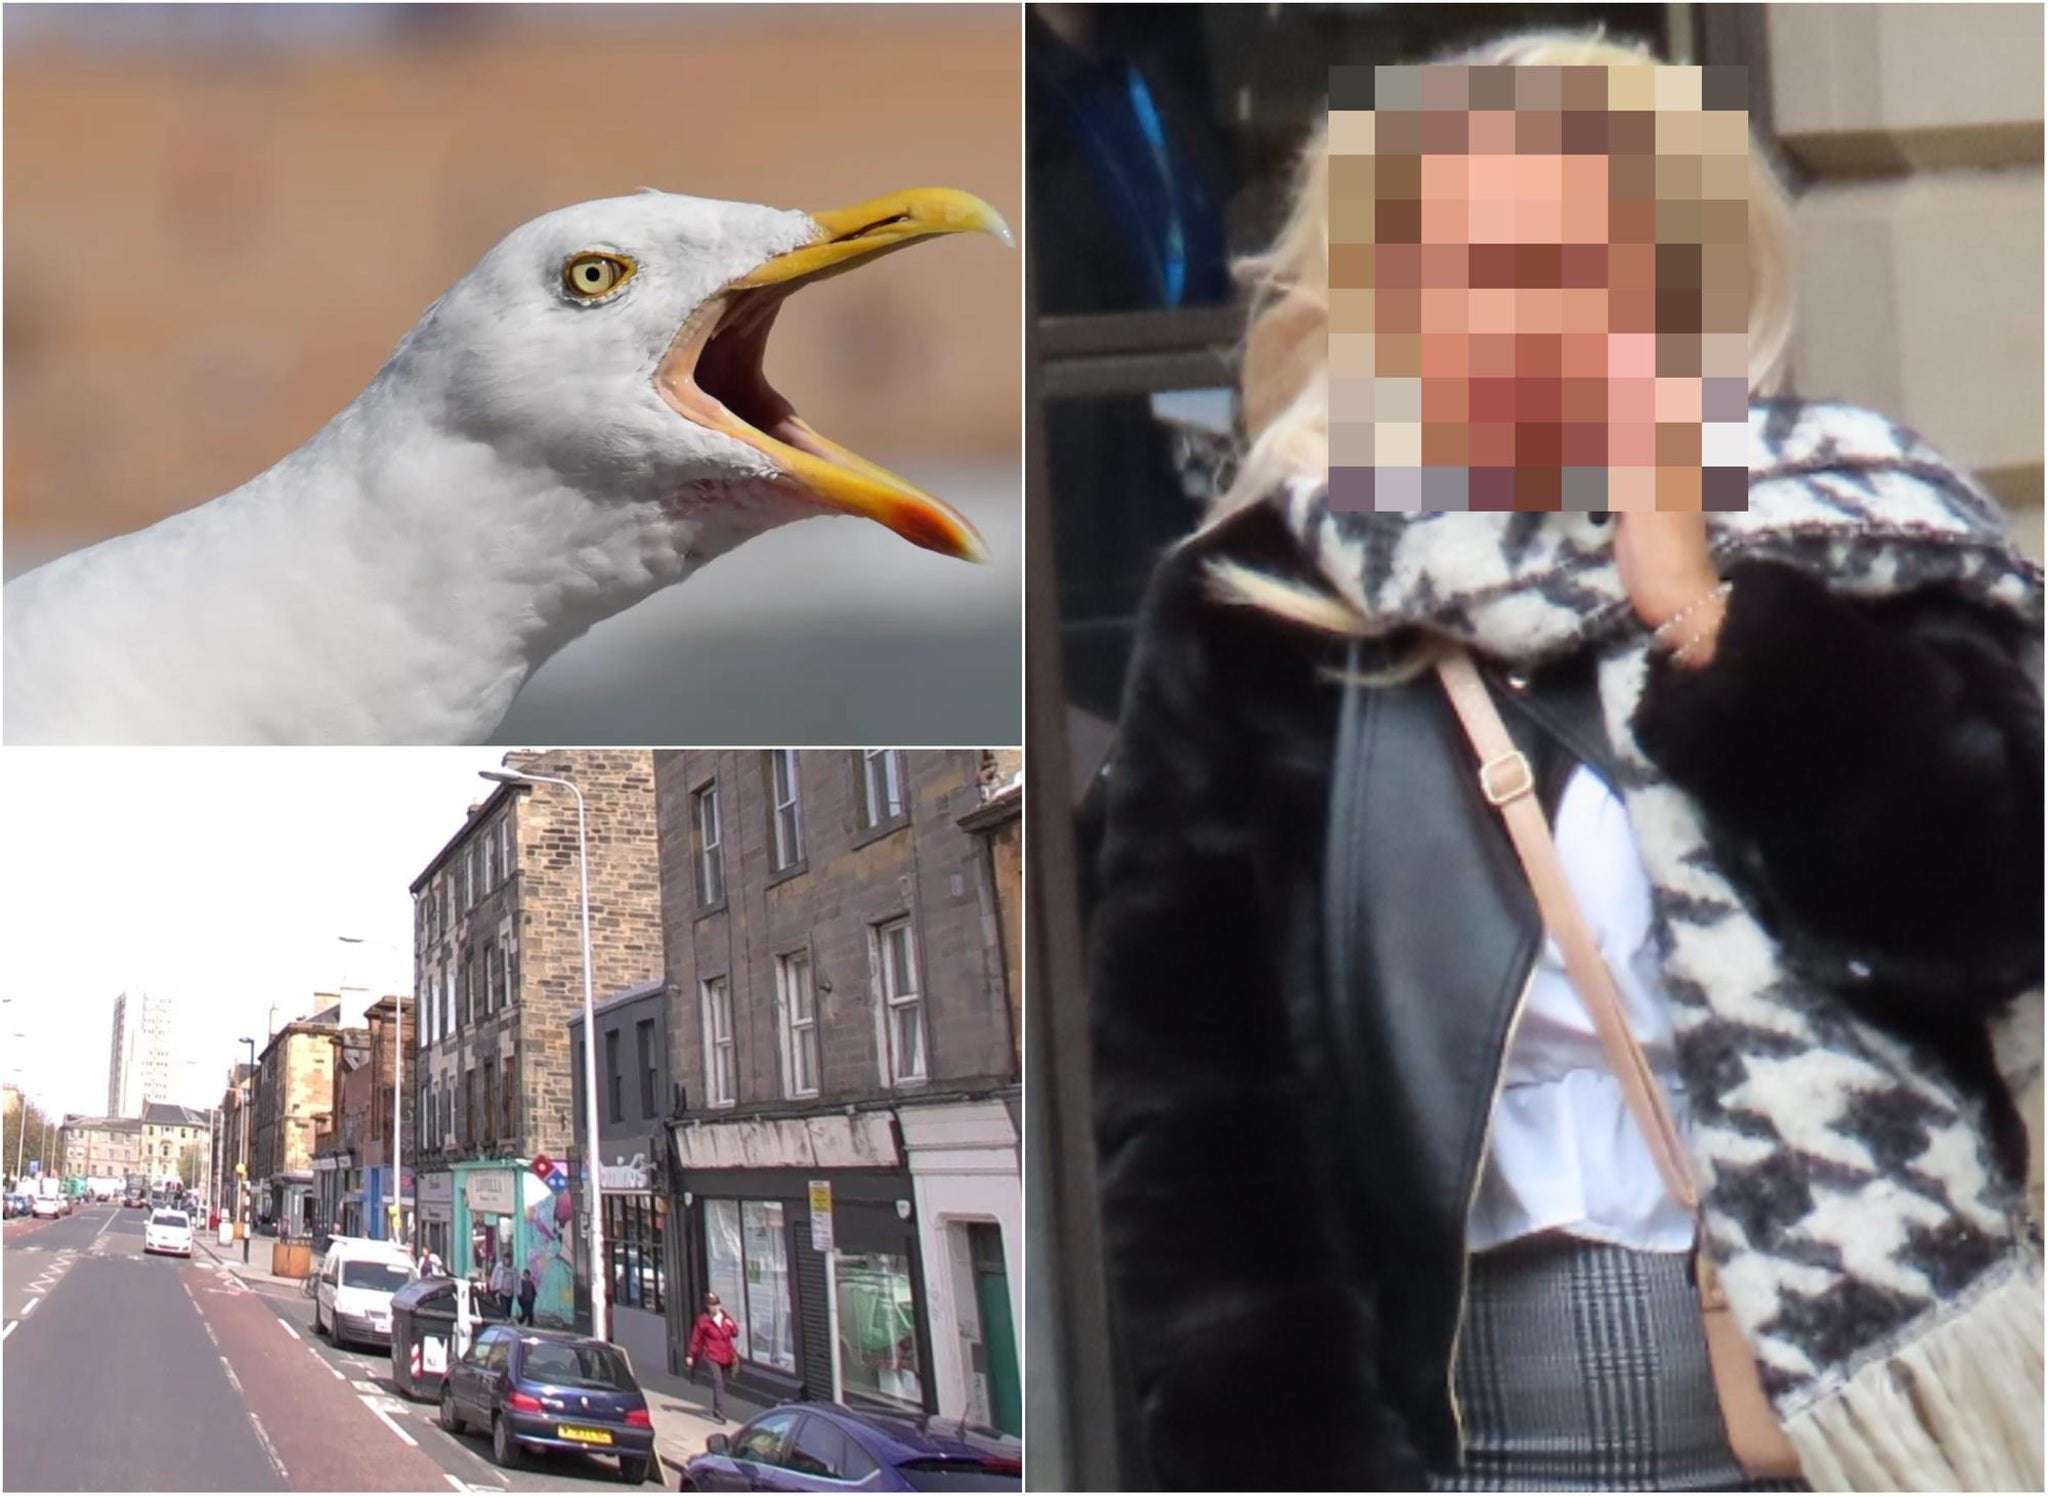 image for Edinburgh woman bit off man’s tongue in street brawl before seagull swooped down and ate it